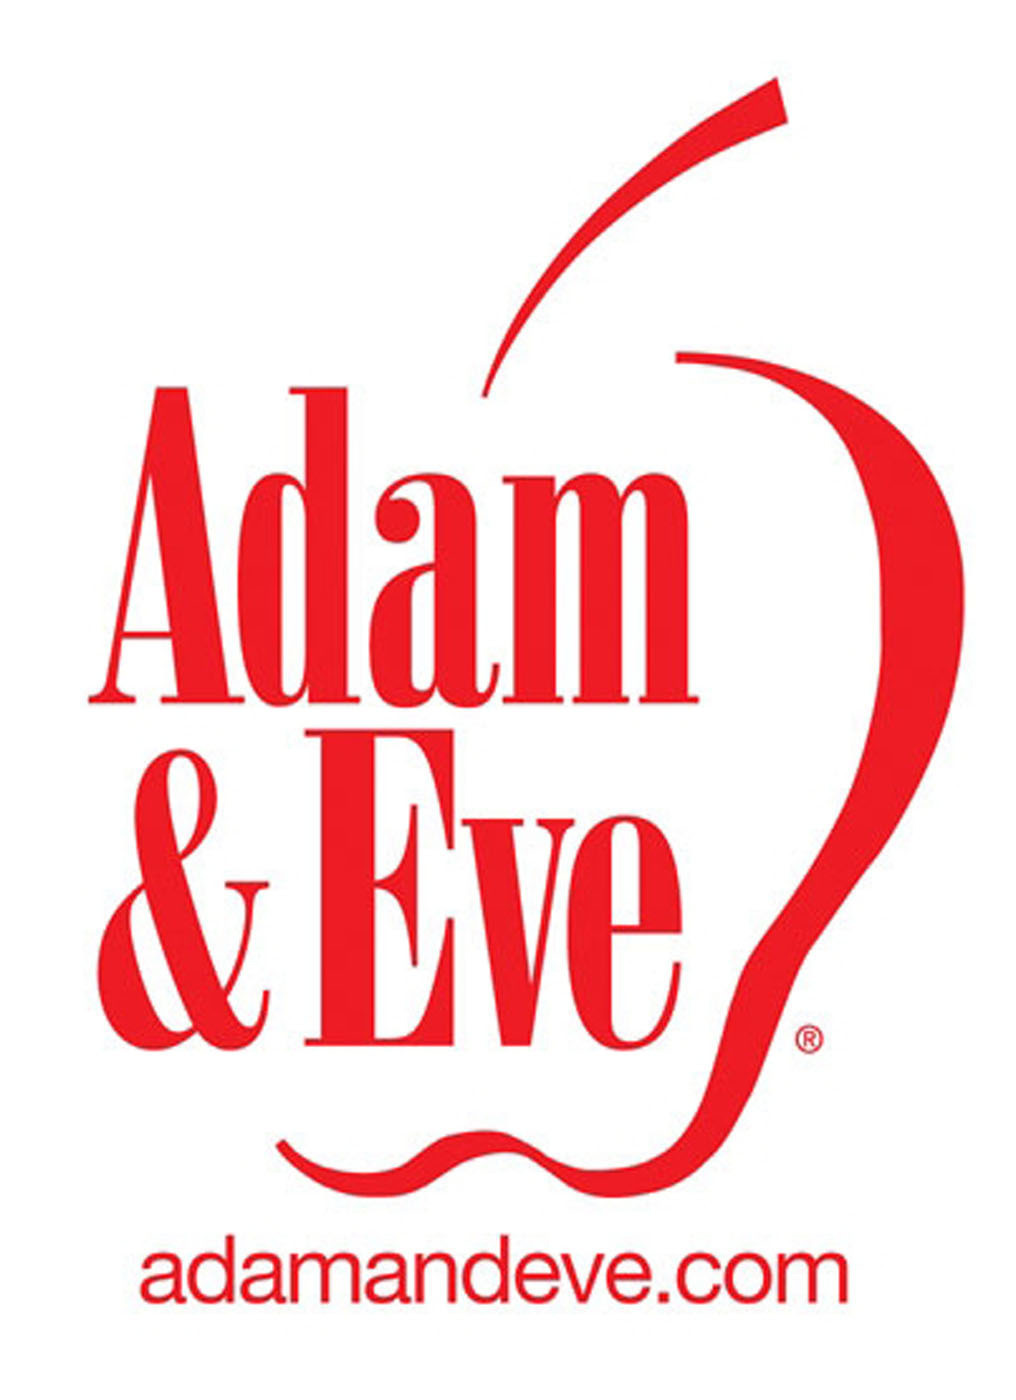 ADAMEVE.COM ASKS "HAVE YOU EVER CHEATED ON SOMEONE?"